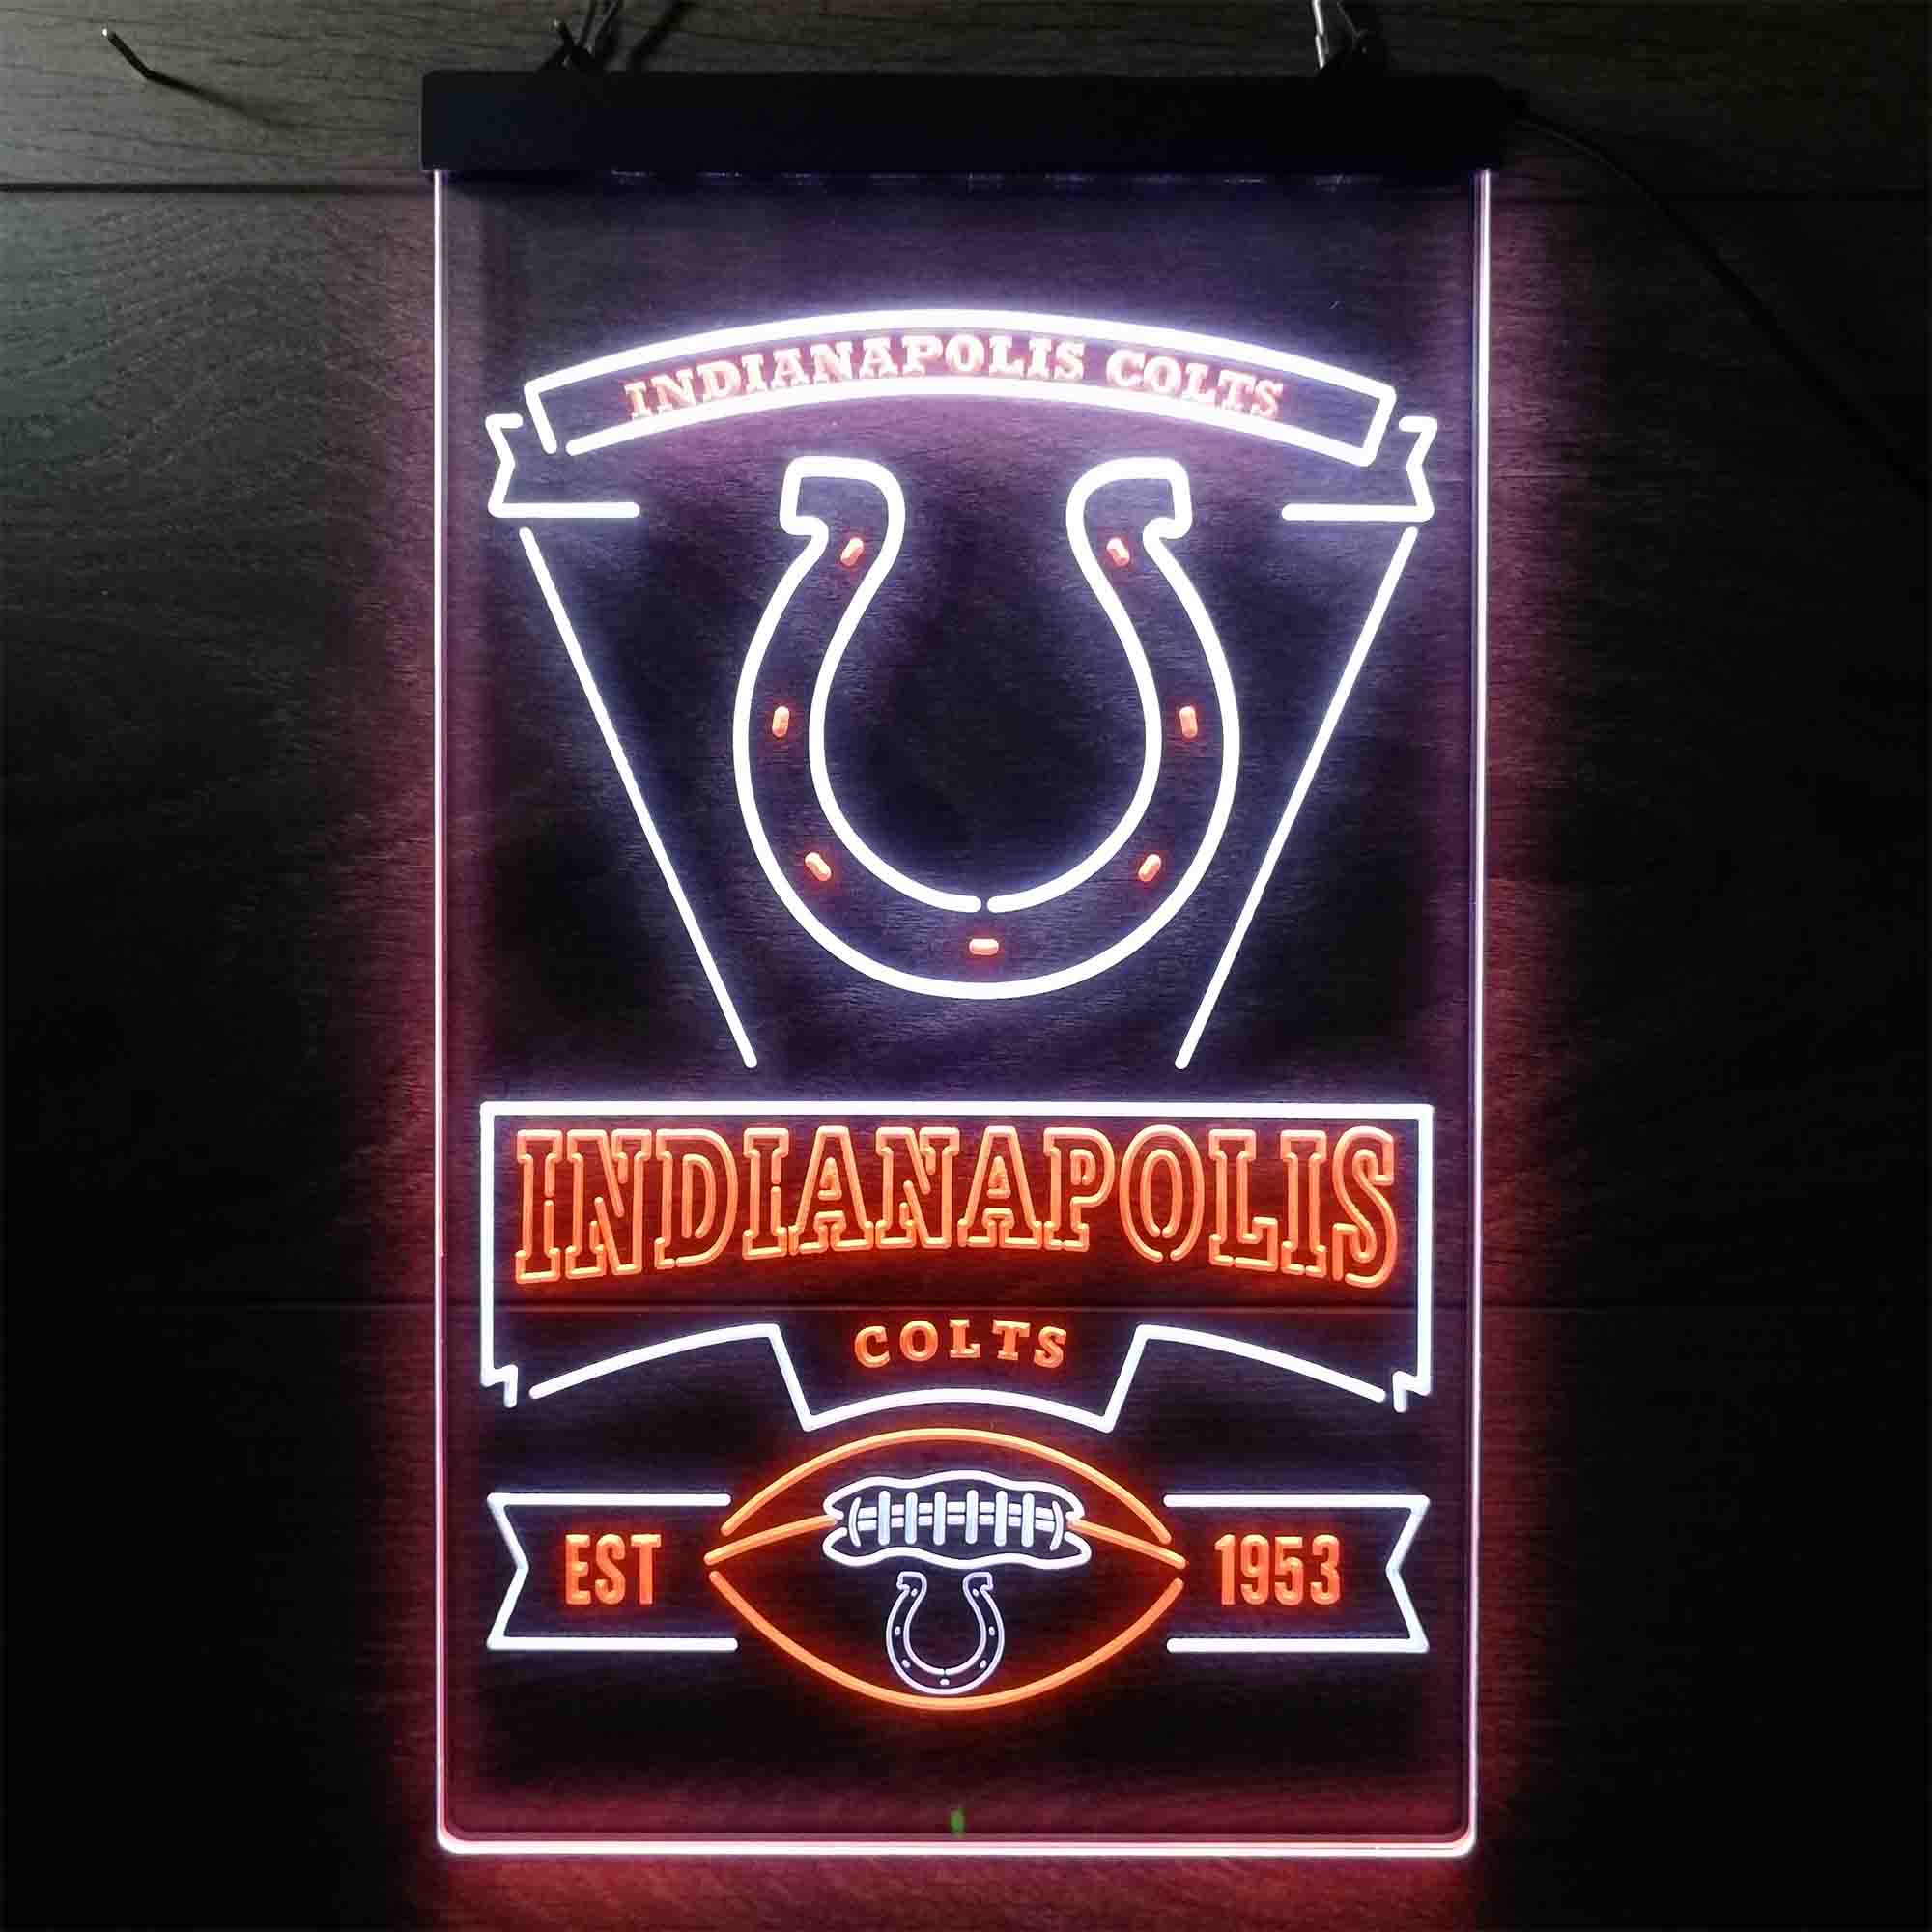 Indianapolis Colts Est. 2953 Neon-Like LED Sign